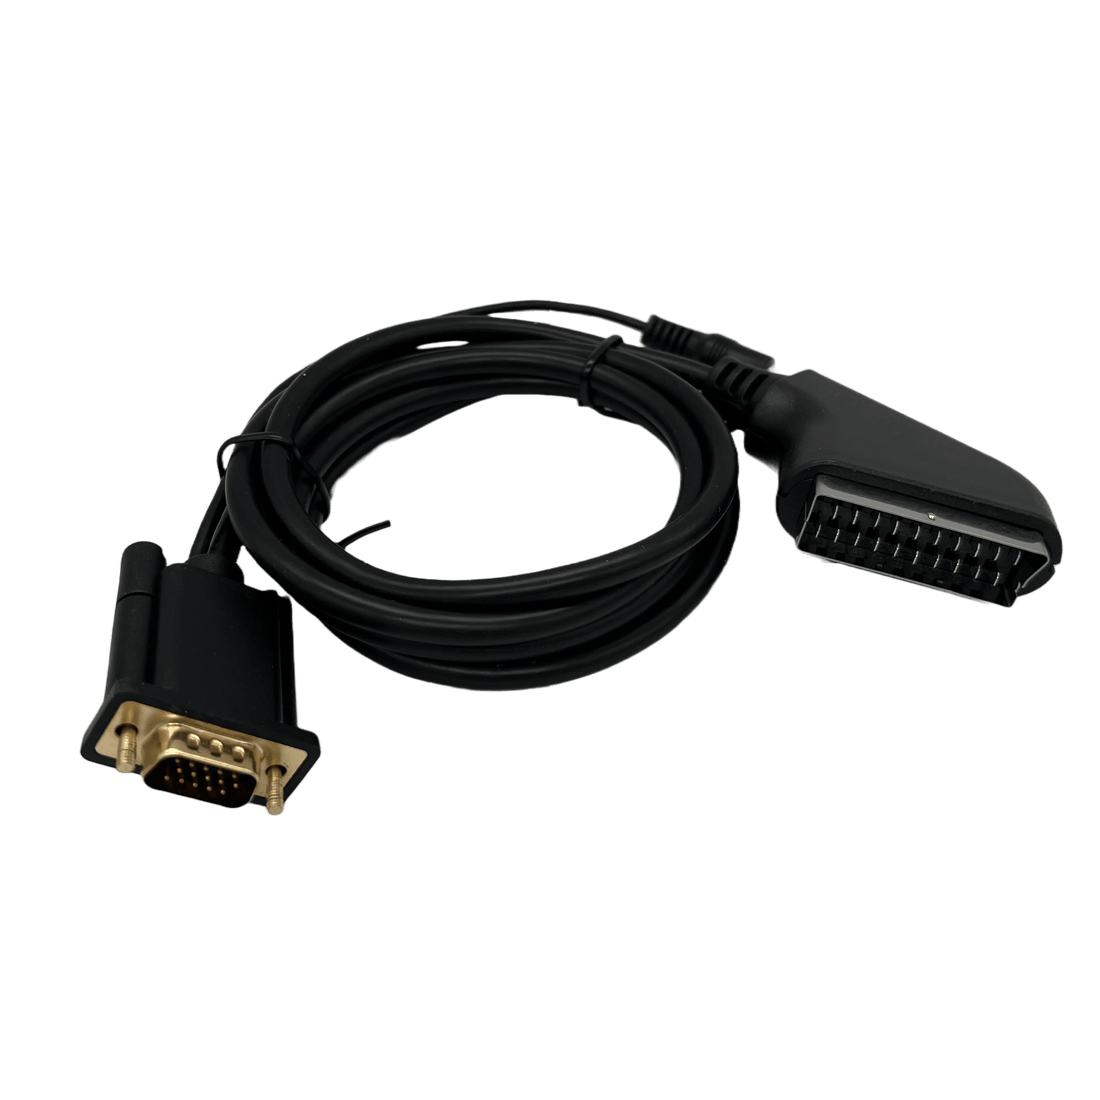 VGA to SCART Premium Video Cable